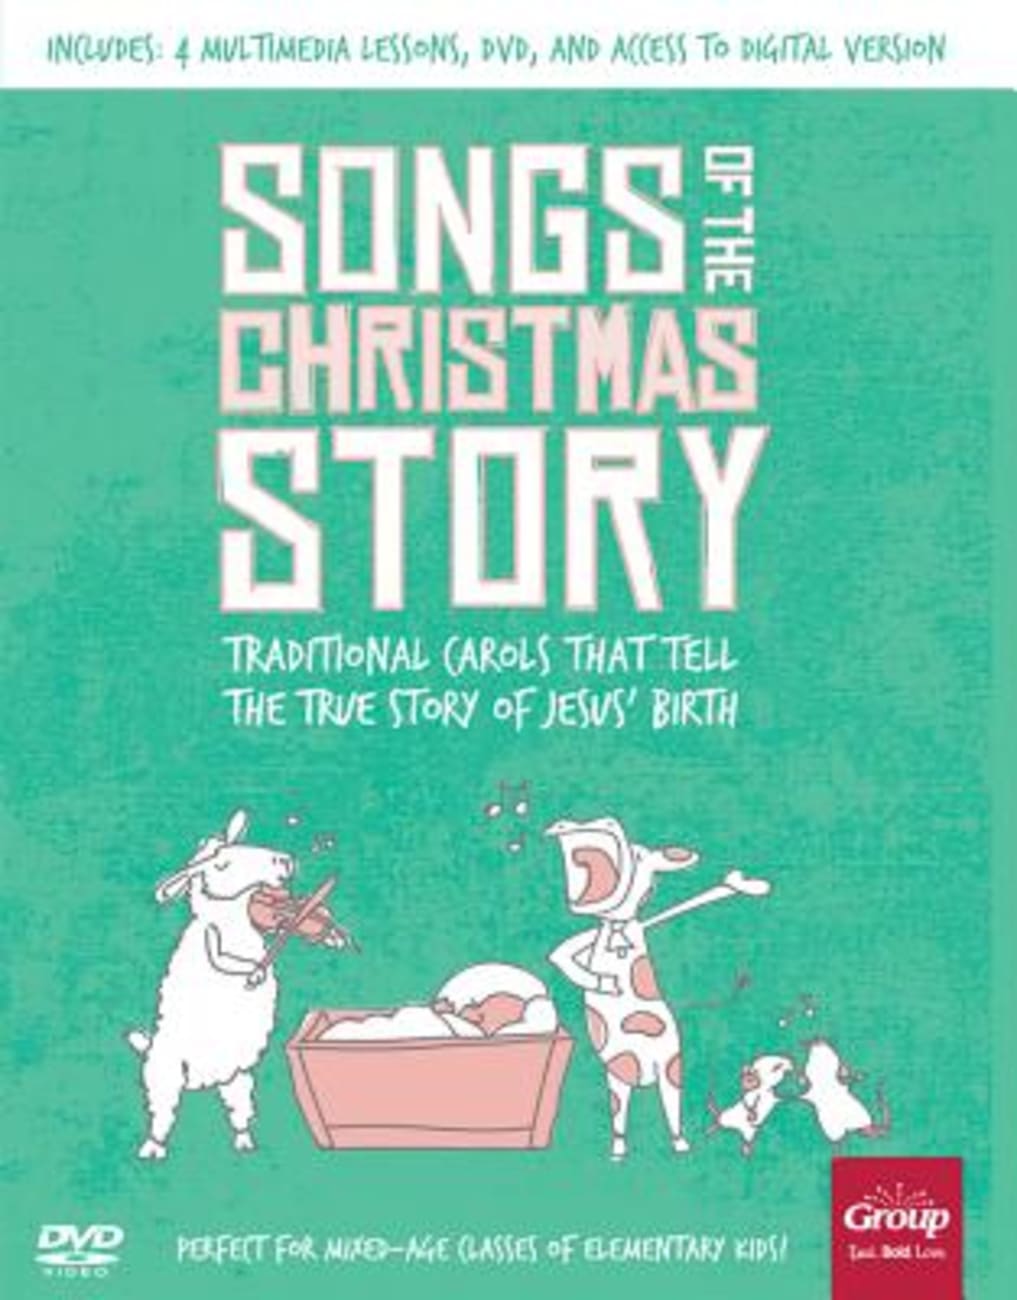 Songs of the Christmas Story: Traditional Carols That Tell the True Story of Jesus' Birth (With Cd) Pack/Kit